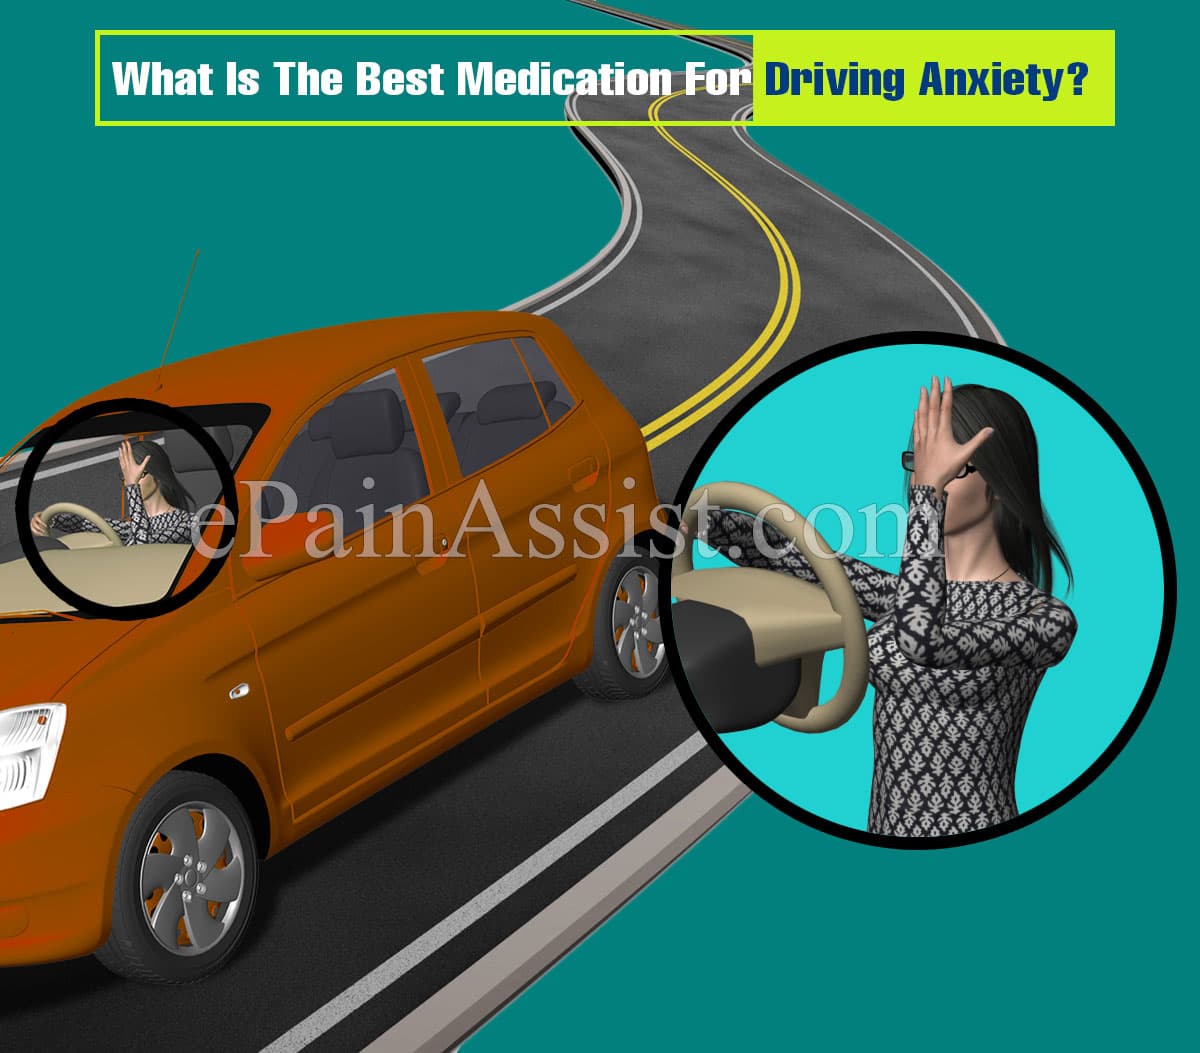 What Is The Best Medication For Driving Anxiety?